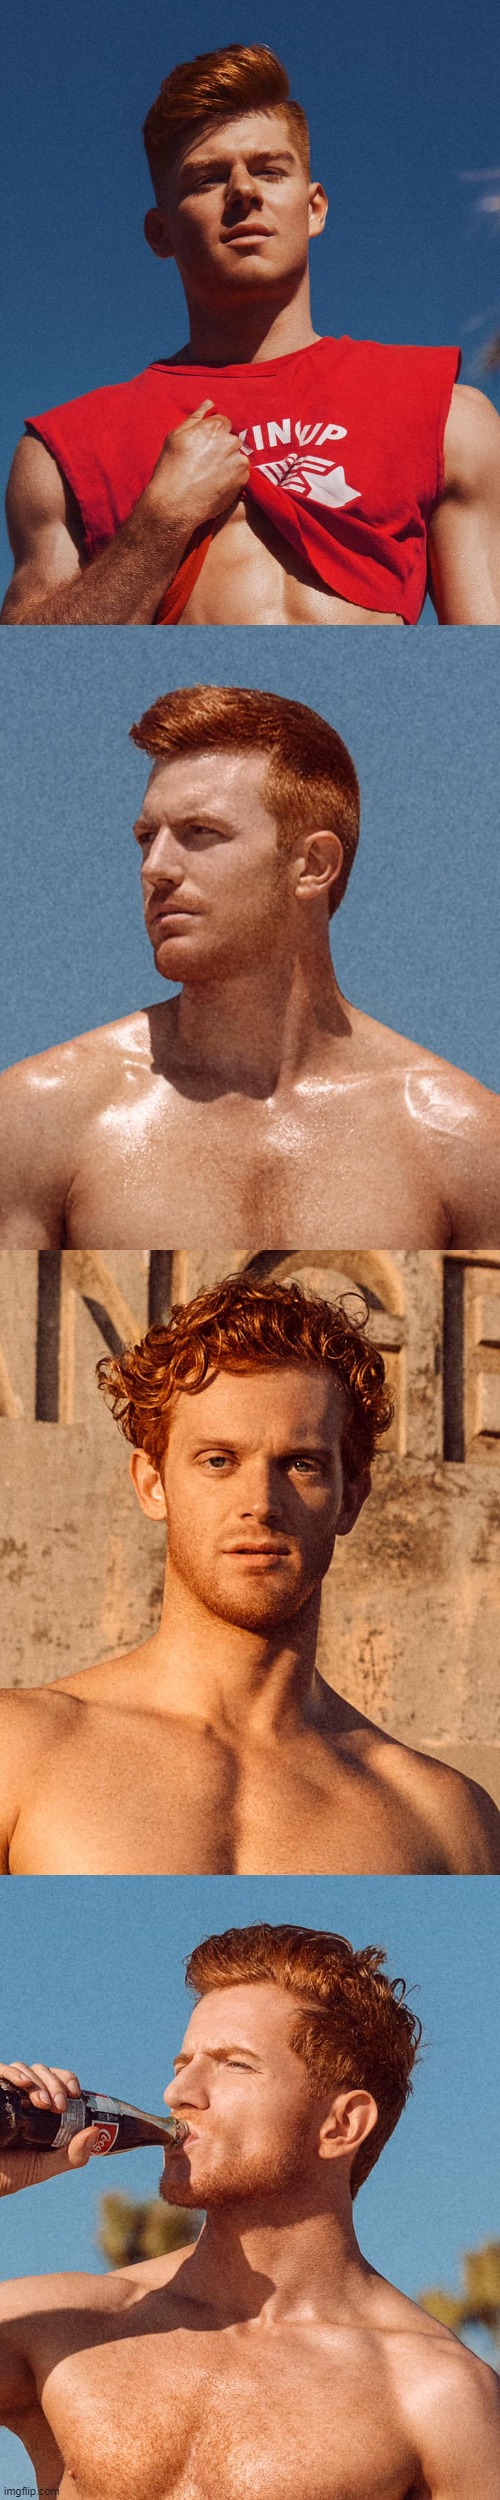 [moar redheaded gods] | image tagged in redheaded god 2,redheads,redhead,sexy man,men,hunk | made w/ Imgflip meme maker